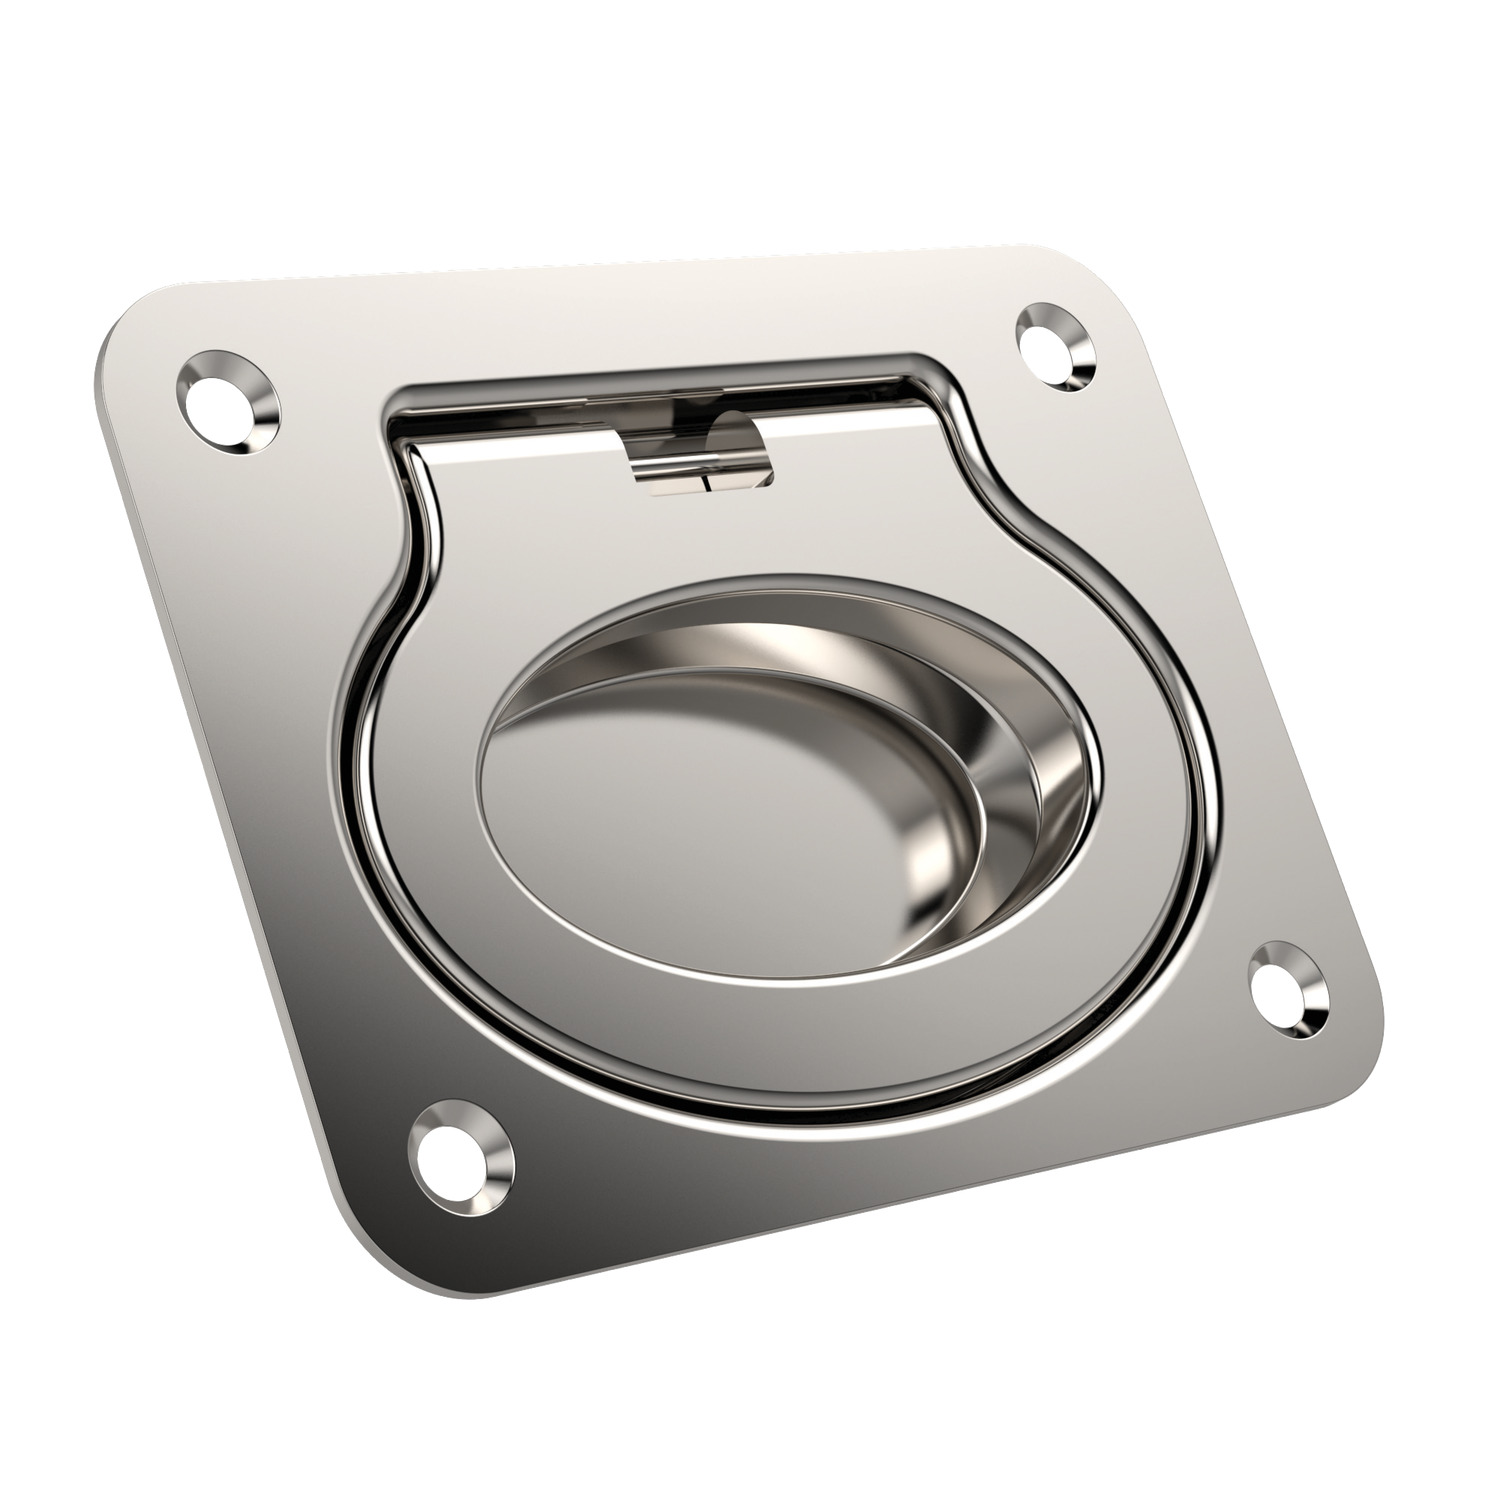 79711.W0110 Ring Pulls Recessed, Stainless Steel 75 - 58. Also known as U7200.AC0110